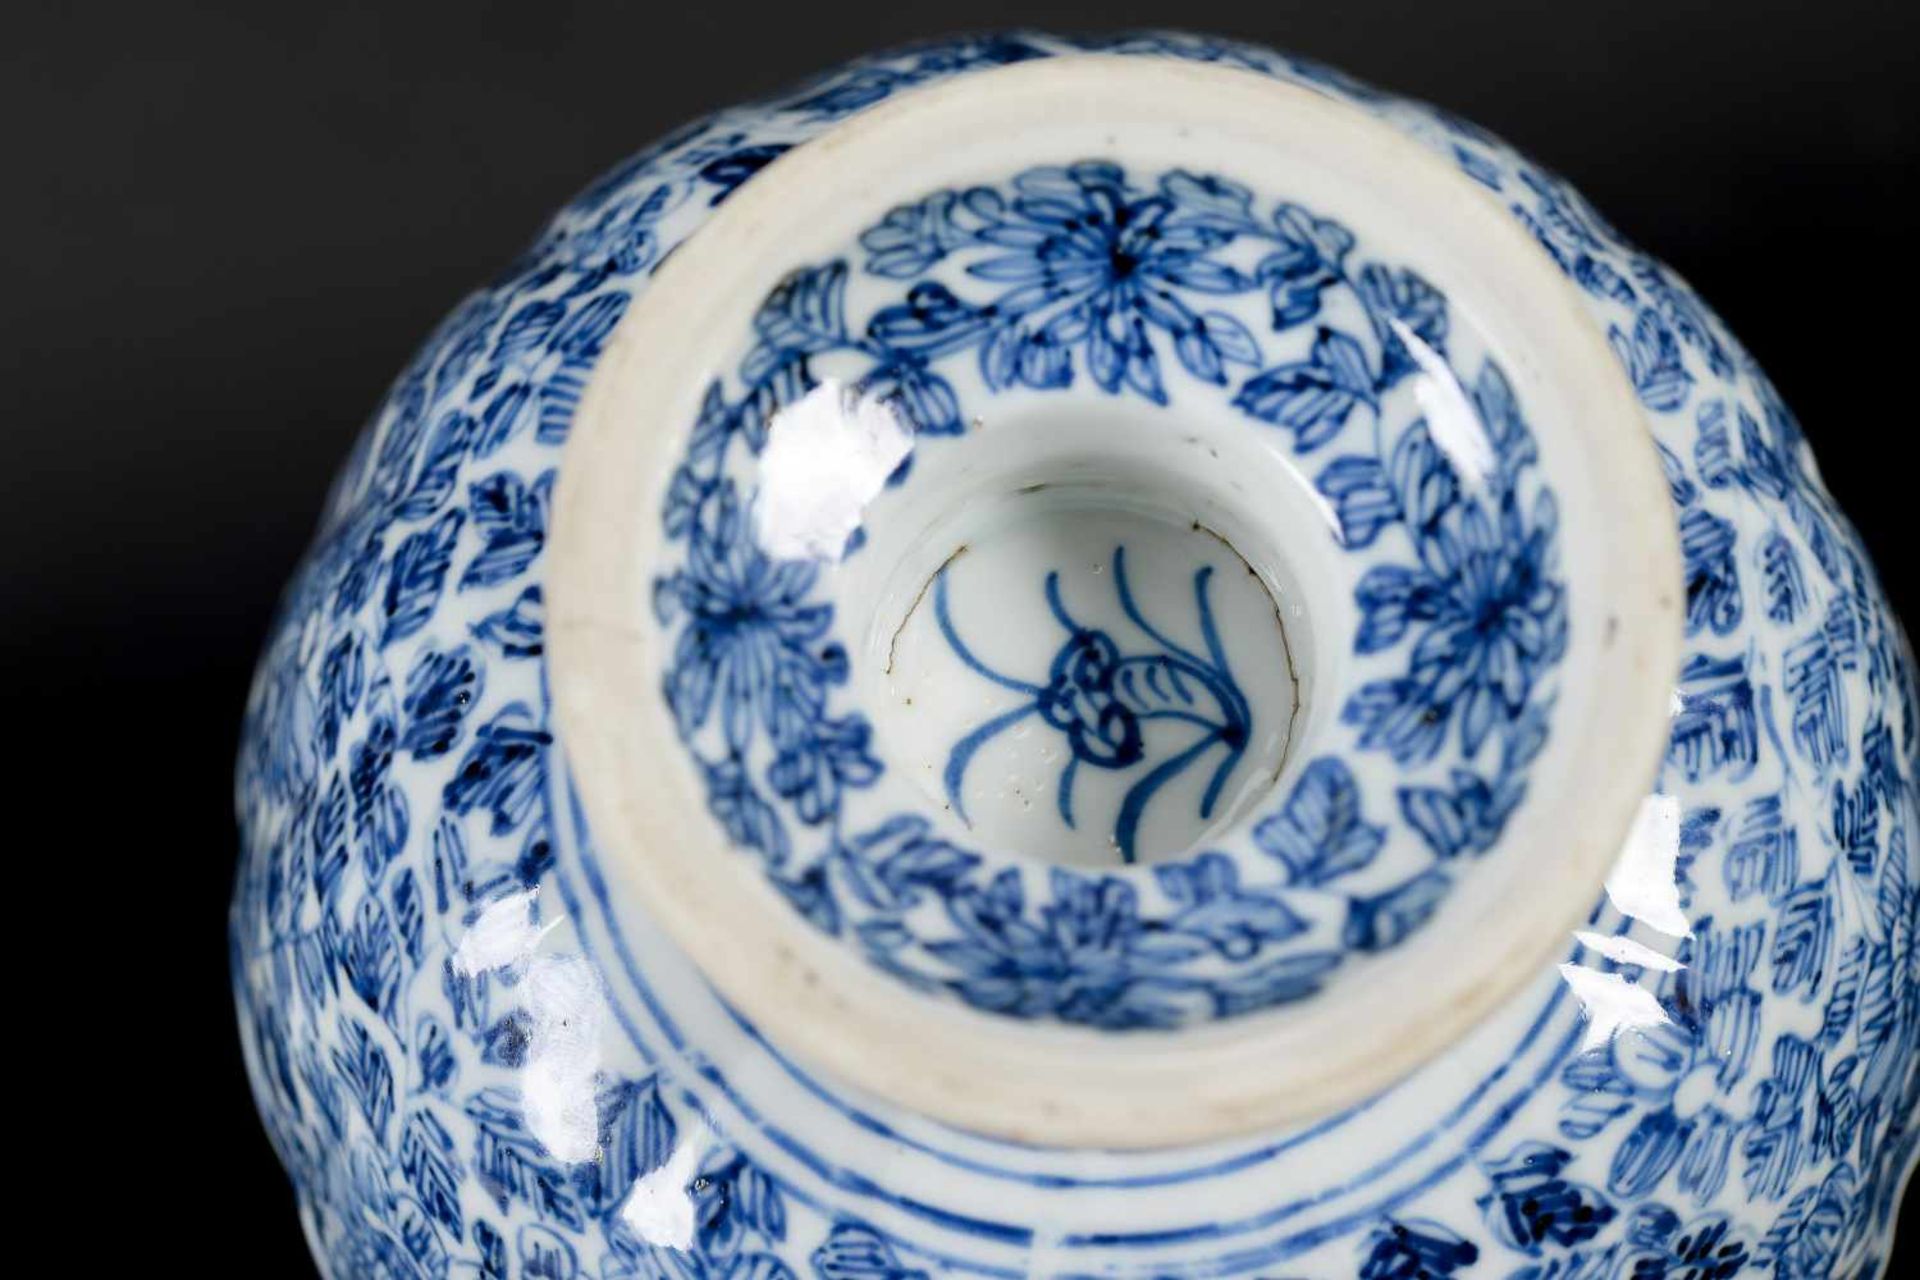 A pair of blue and white porcelain tazzas, decorated with flowers. Marked with symbol. China, - Image 14 of 14